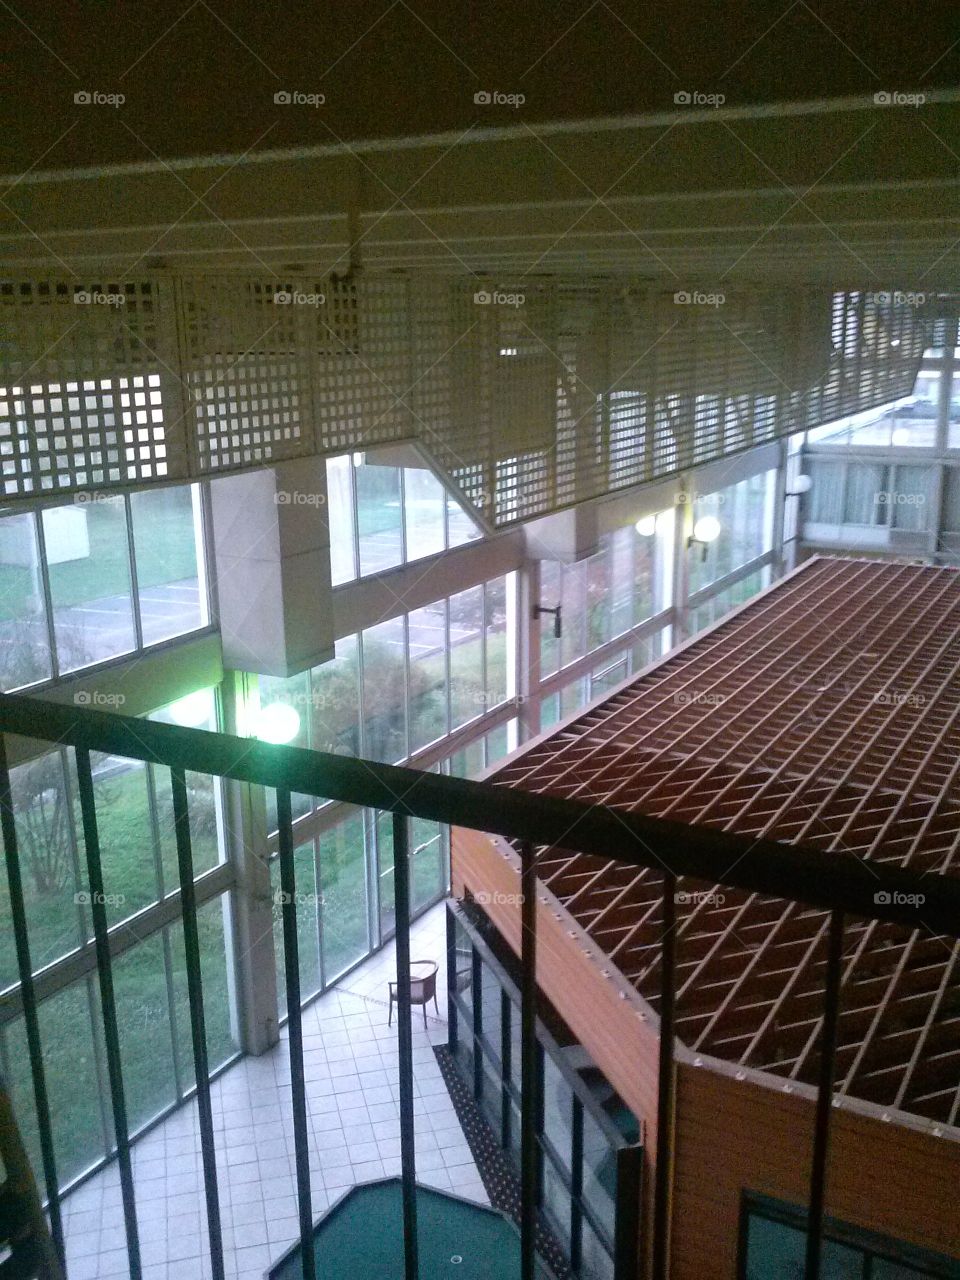 at the railing of a hotel's indoor balcony